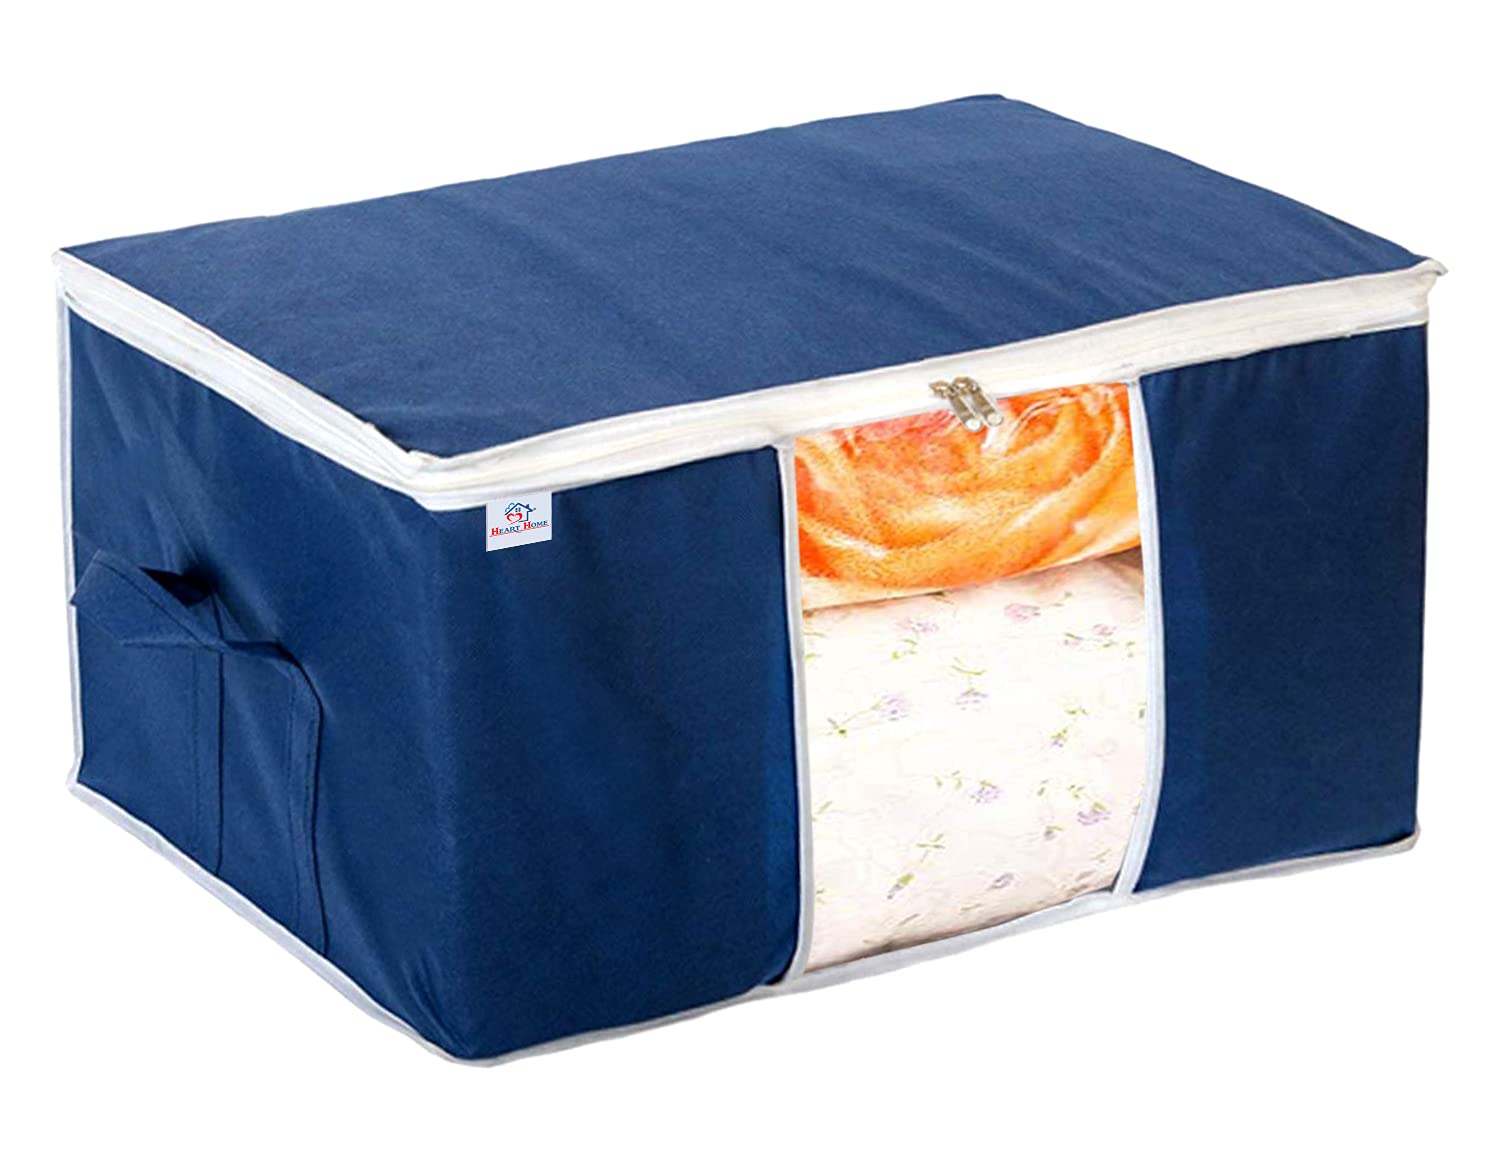 Heart Home Clothing Storage Bags, Under Bed Foldable Organizer, Store Blankets, Clothes With Tranasparent Window- Pack of 4 (Navy Blue)-HS_38_HEARTH21711